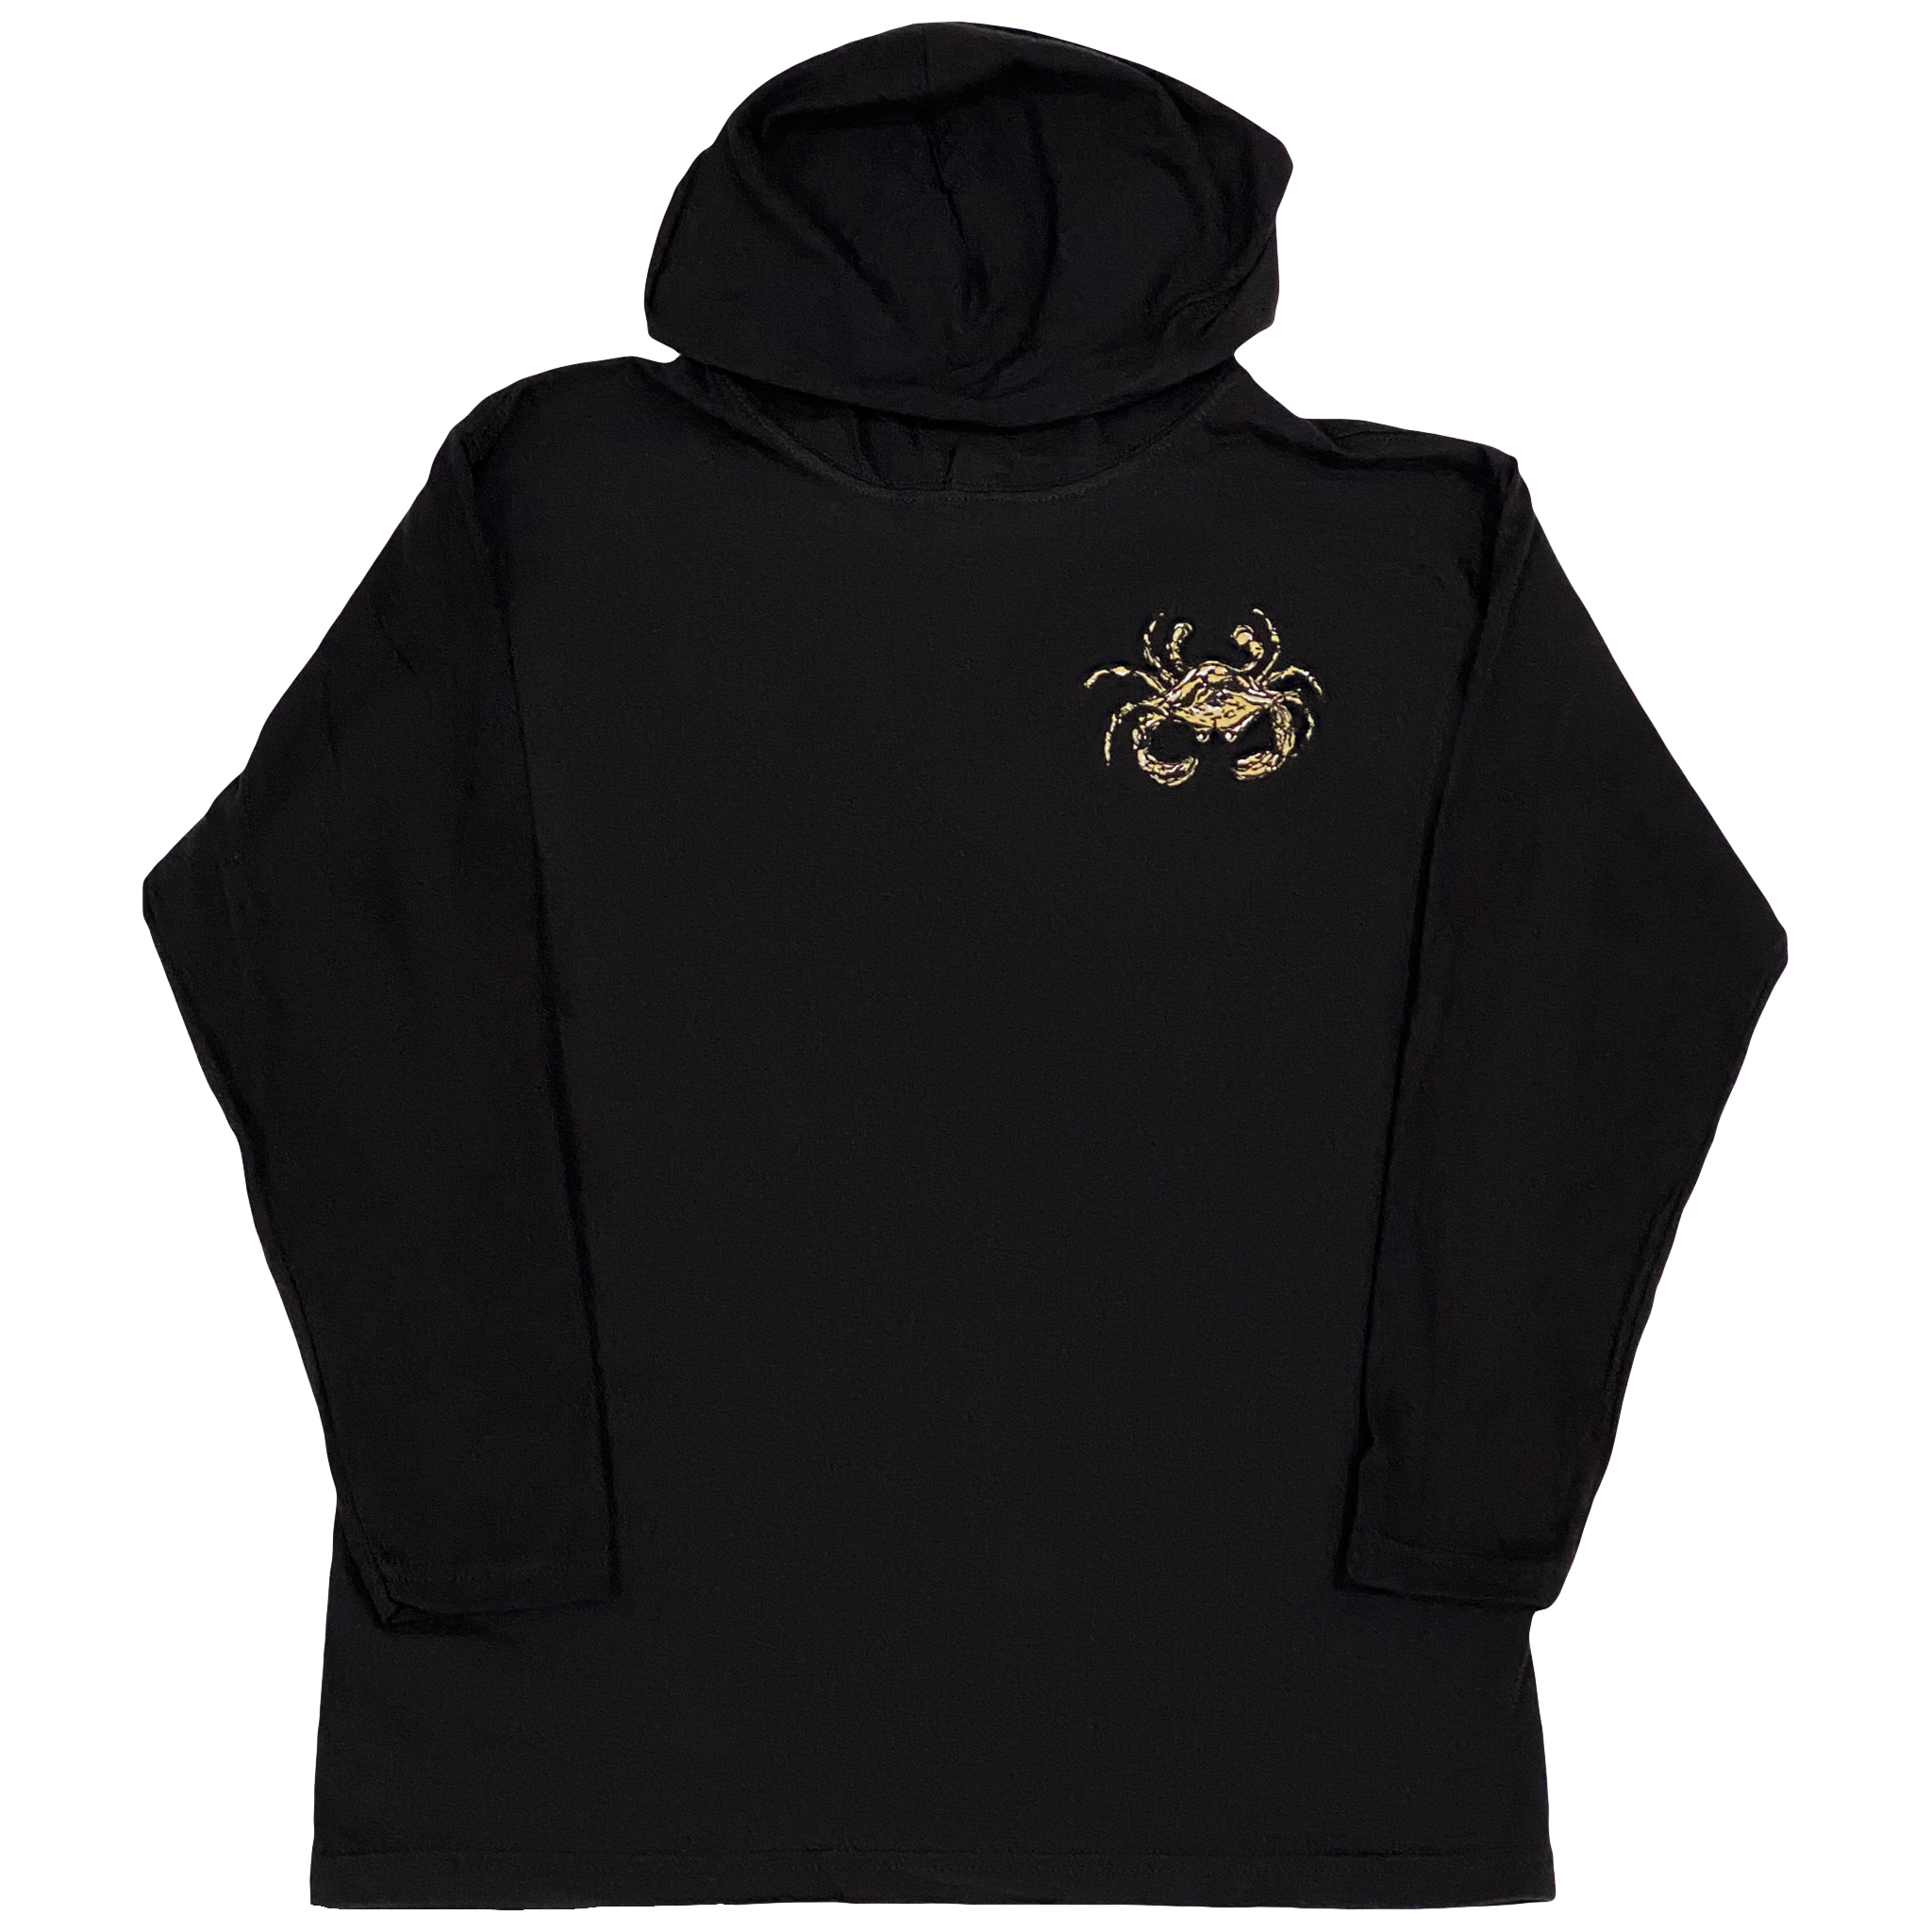  A black hooded long sleeve cotton t-shirt with a black, gold, and white crab on the left chest.  